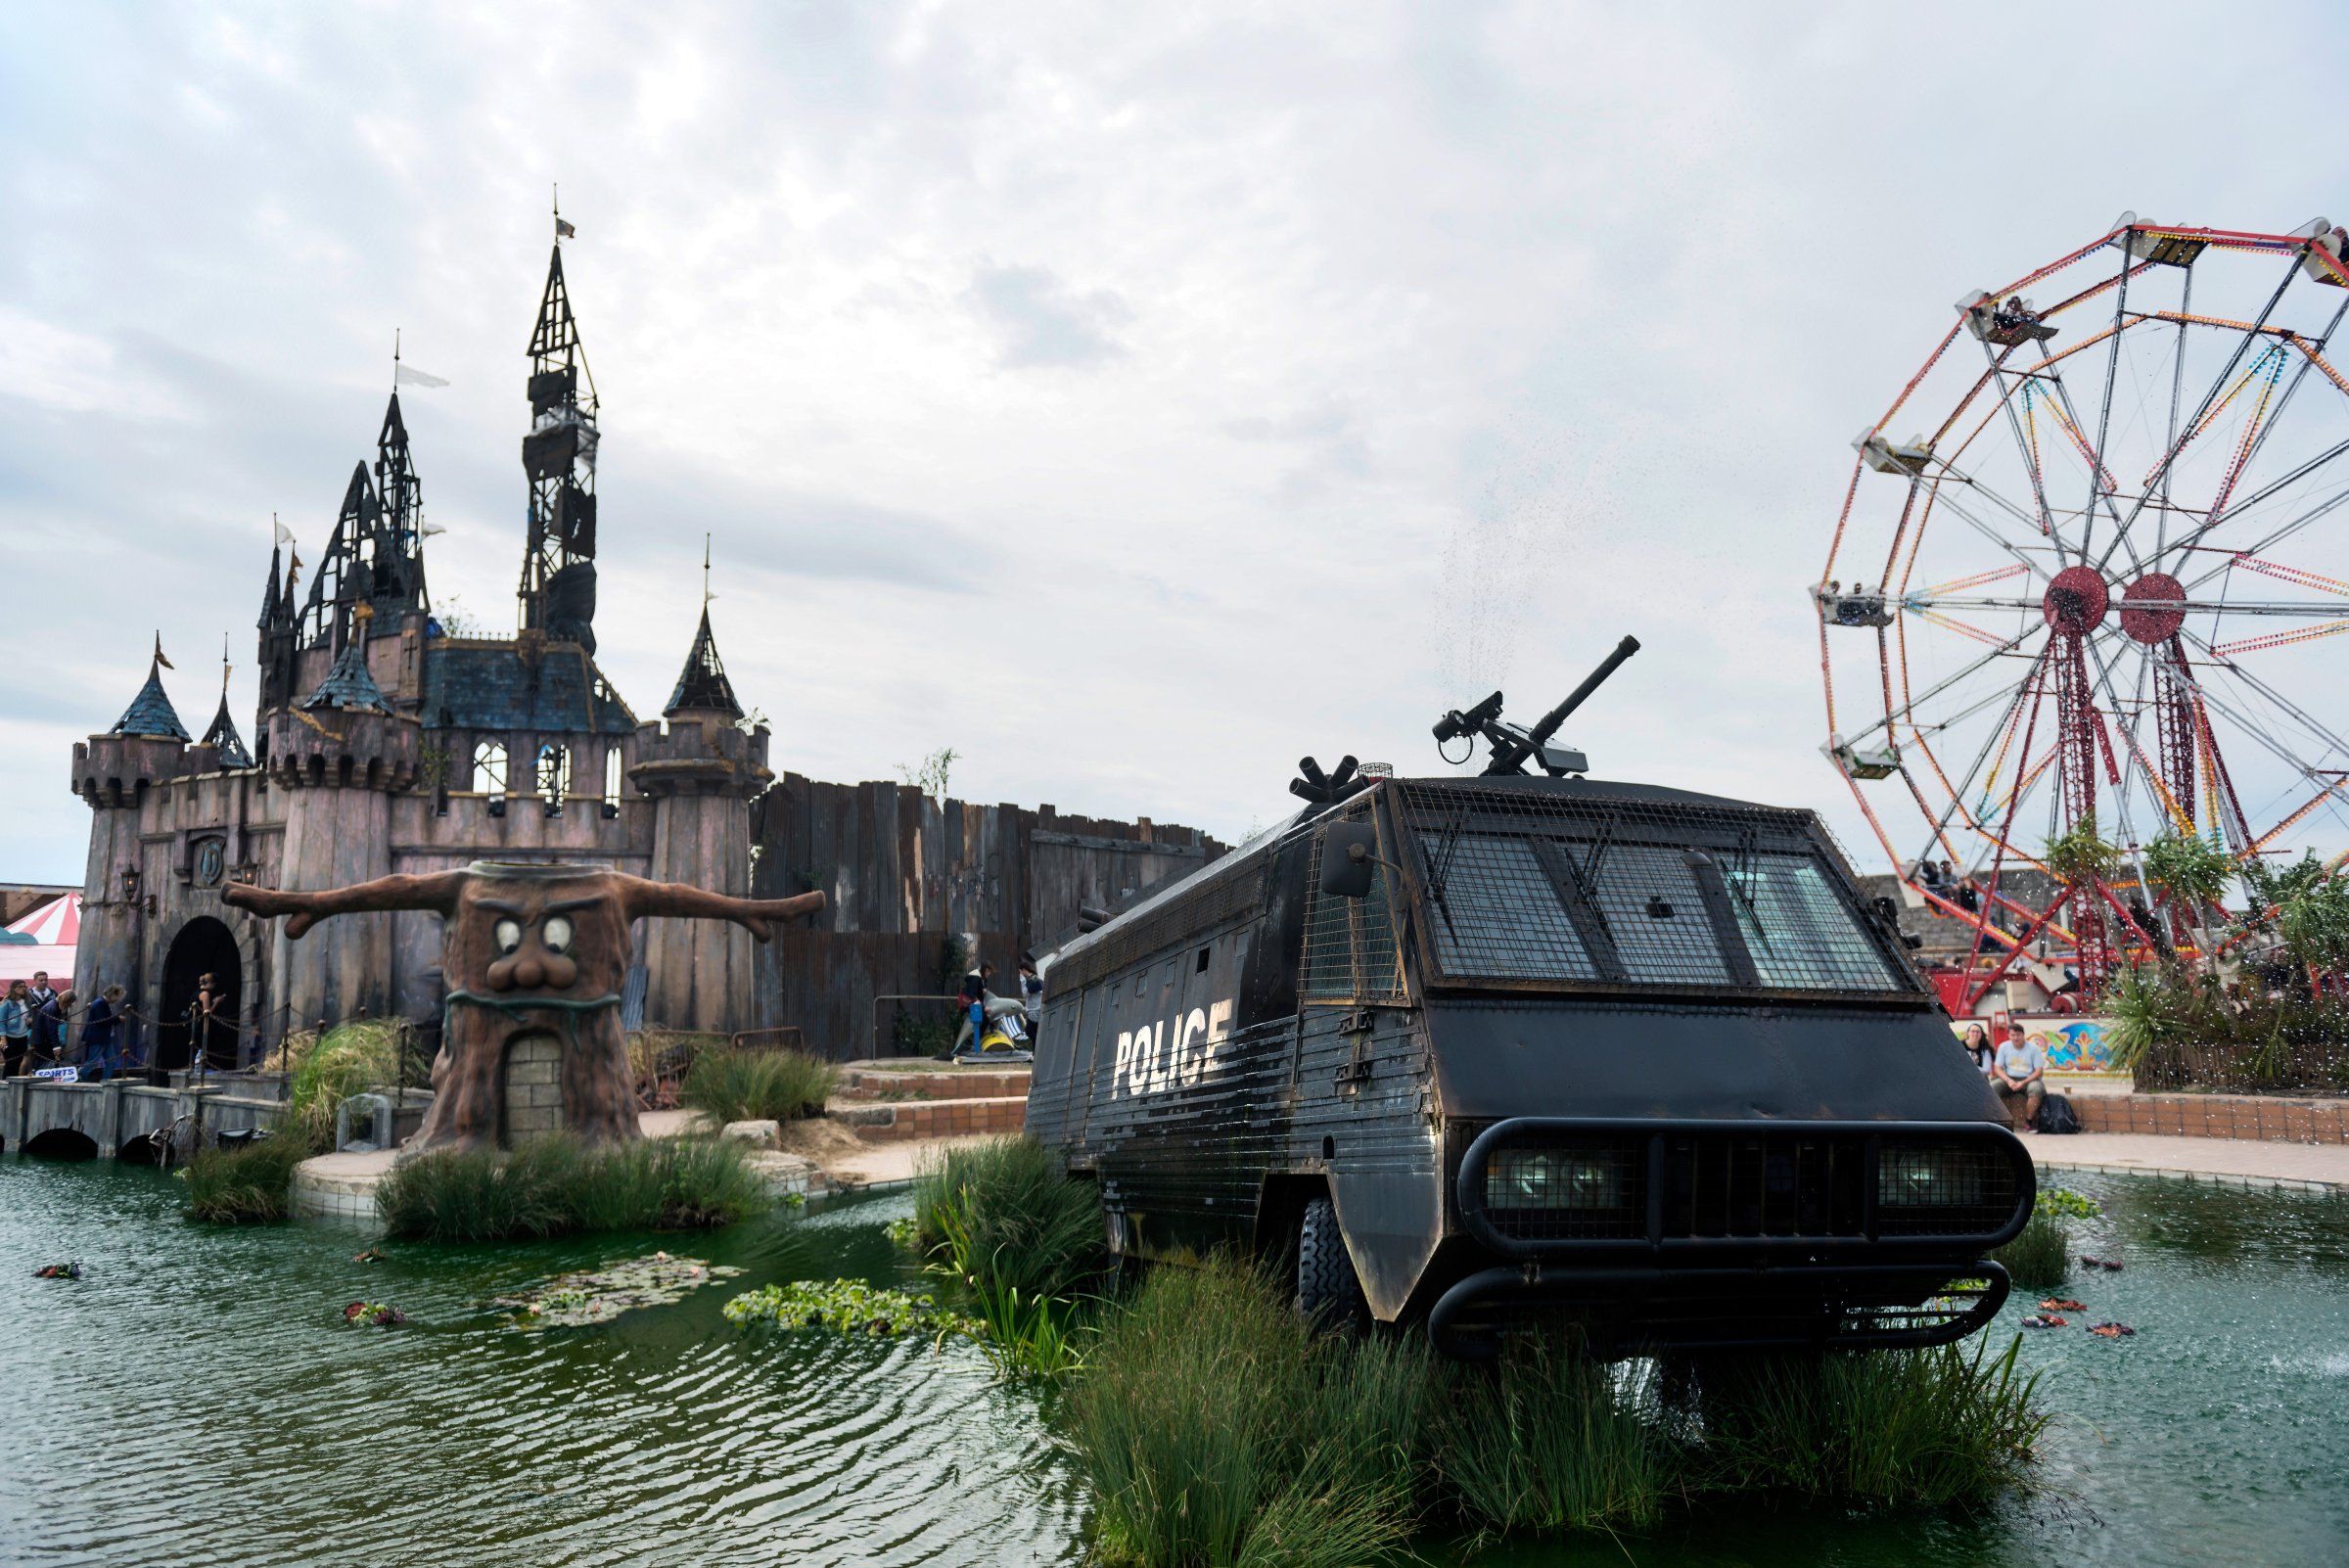 at Banksy's Dismaland on September 10, 2015 in Weston-Super-Mare, England.